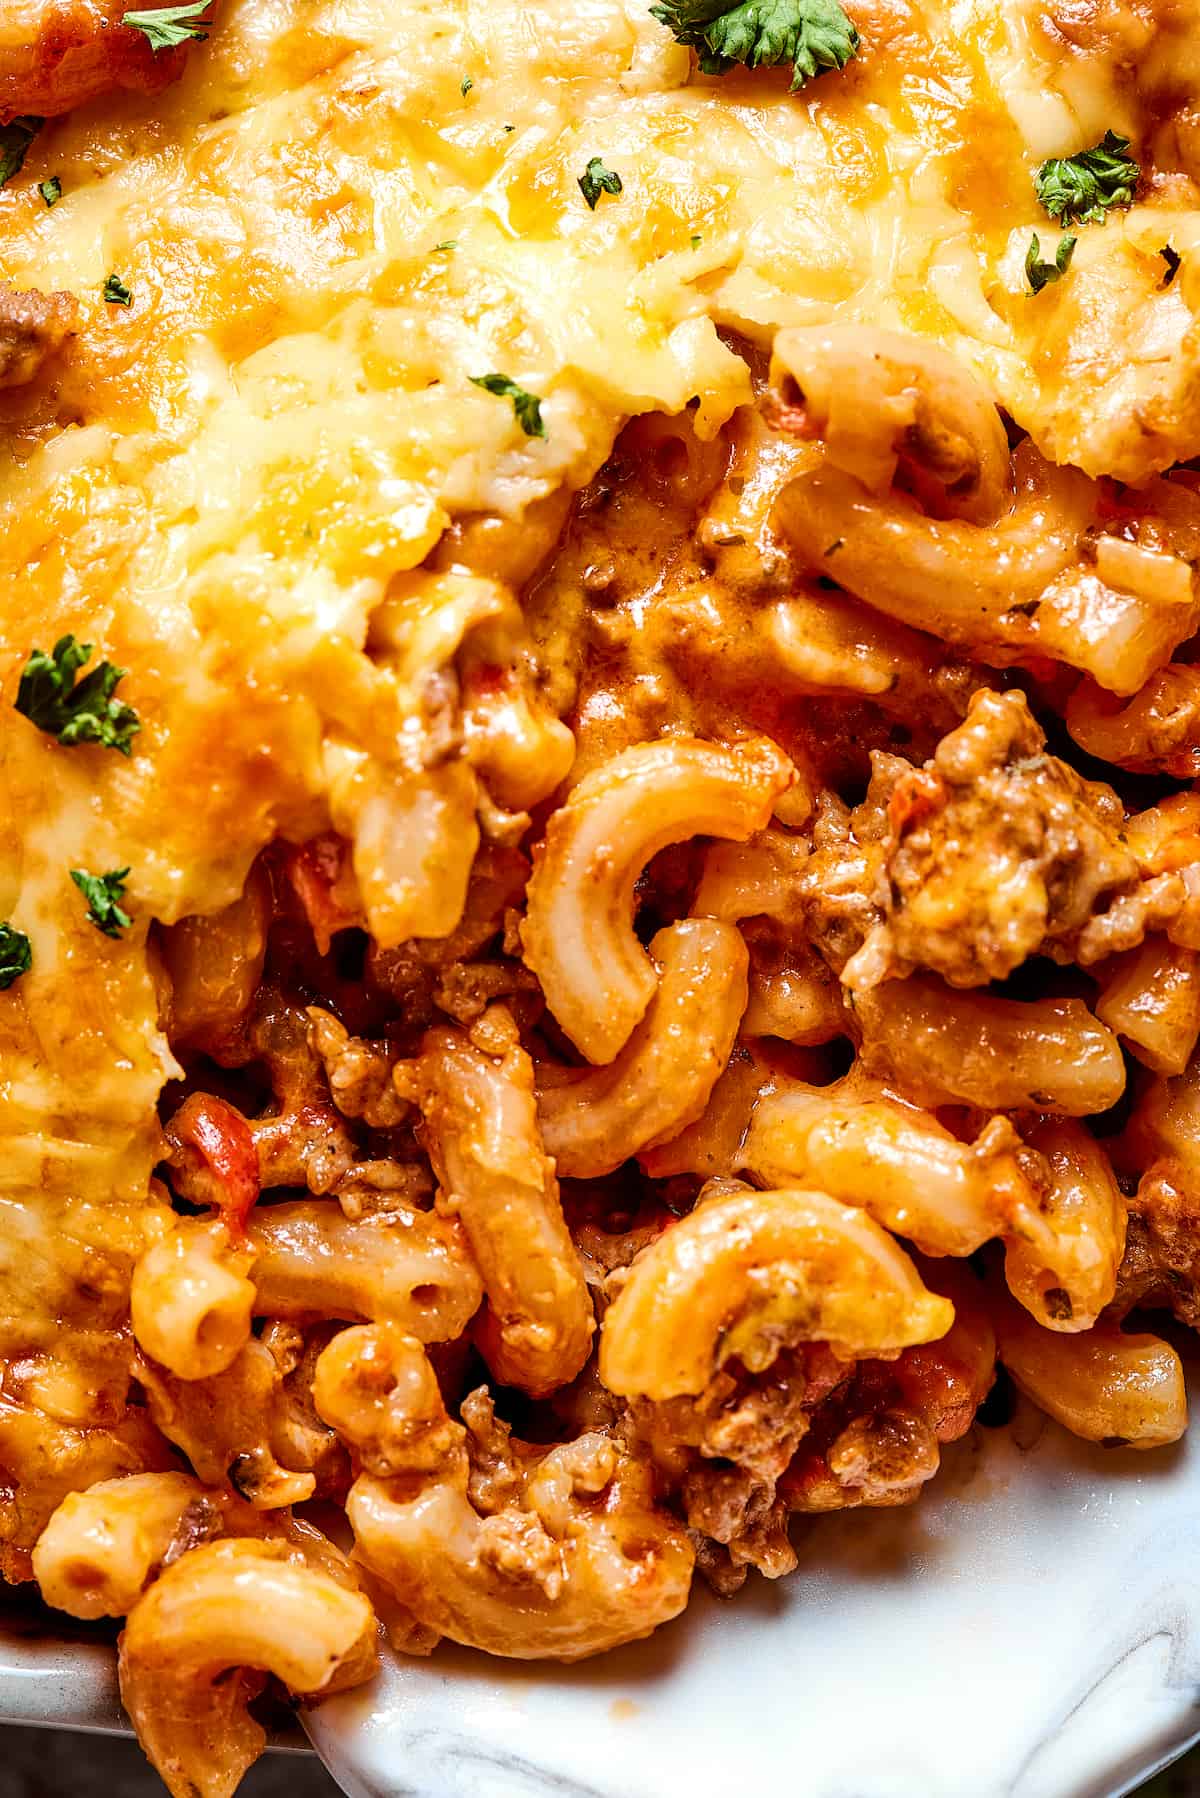 A close-up shot of a serving of macaroni casserole with beef and cheese.